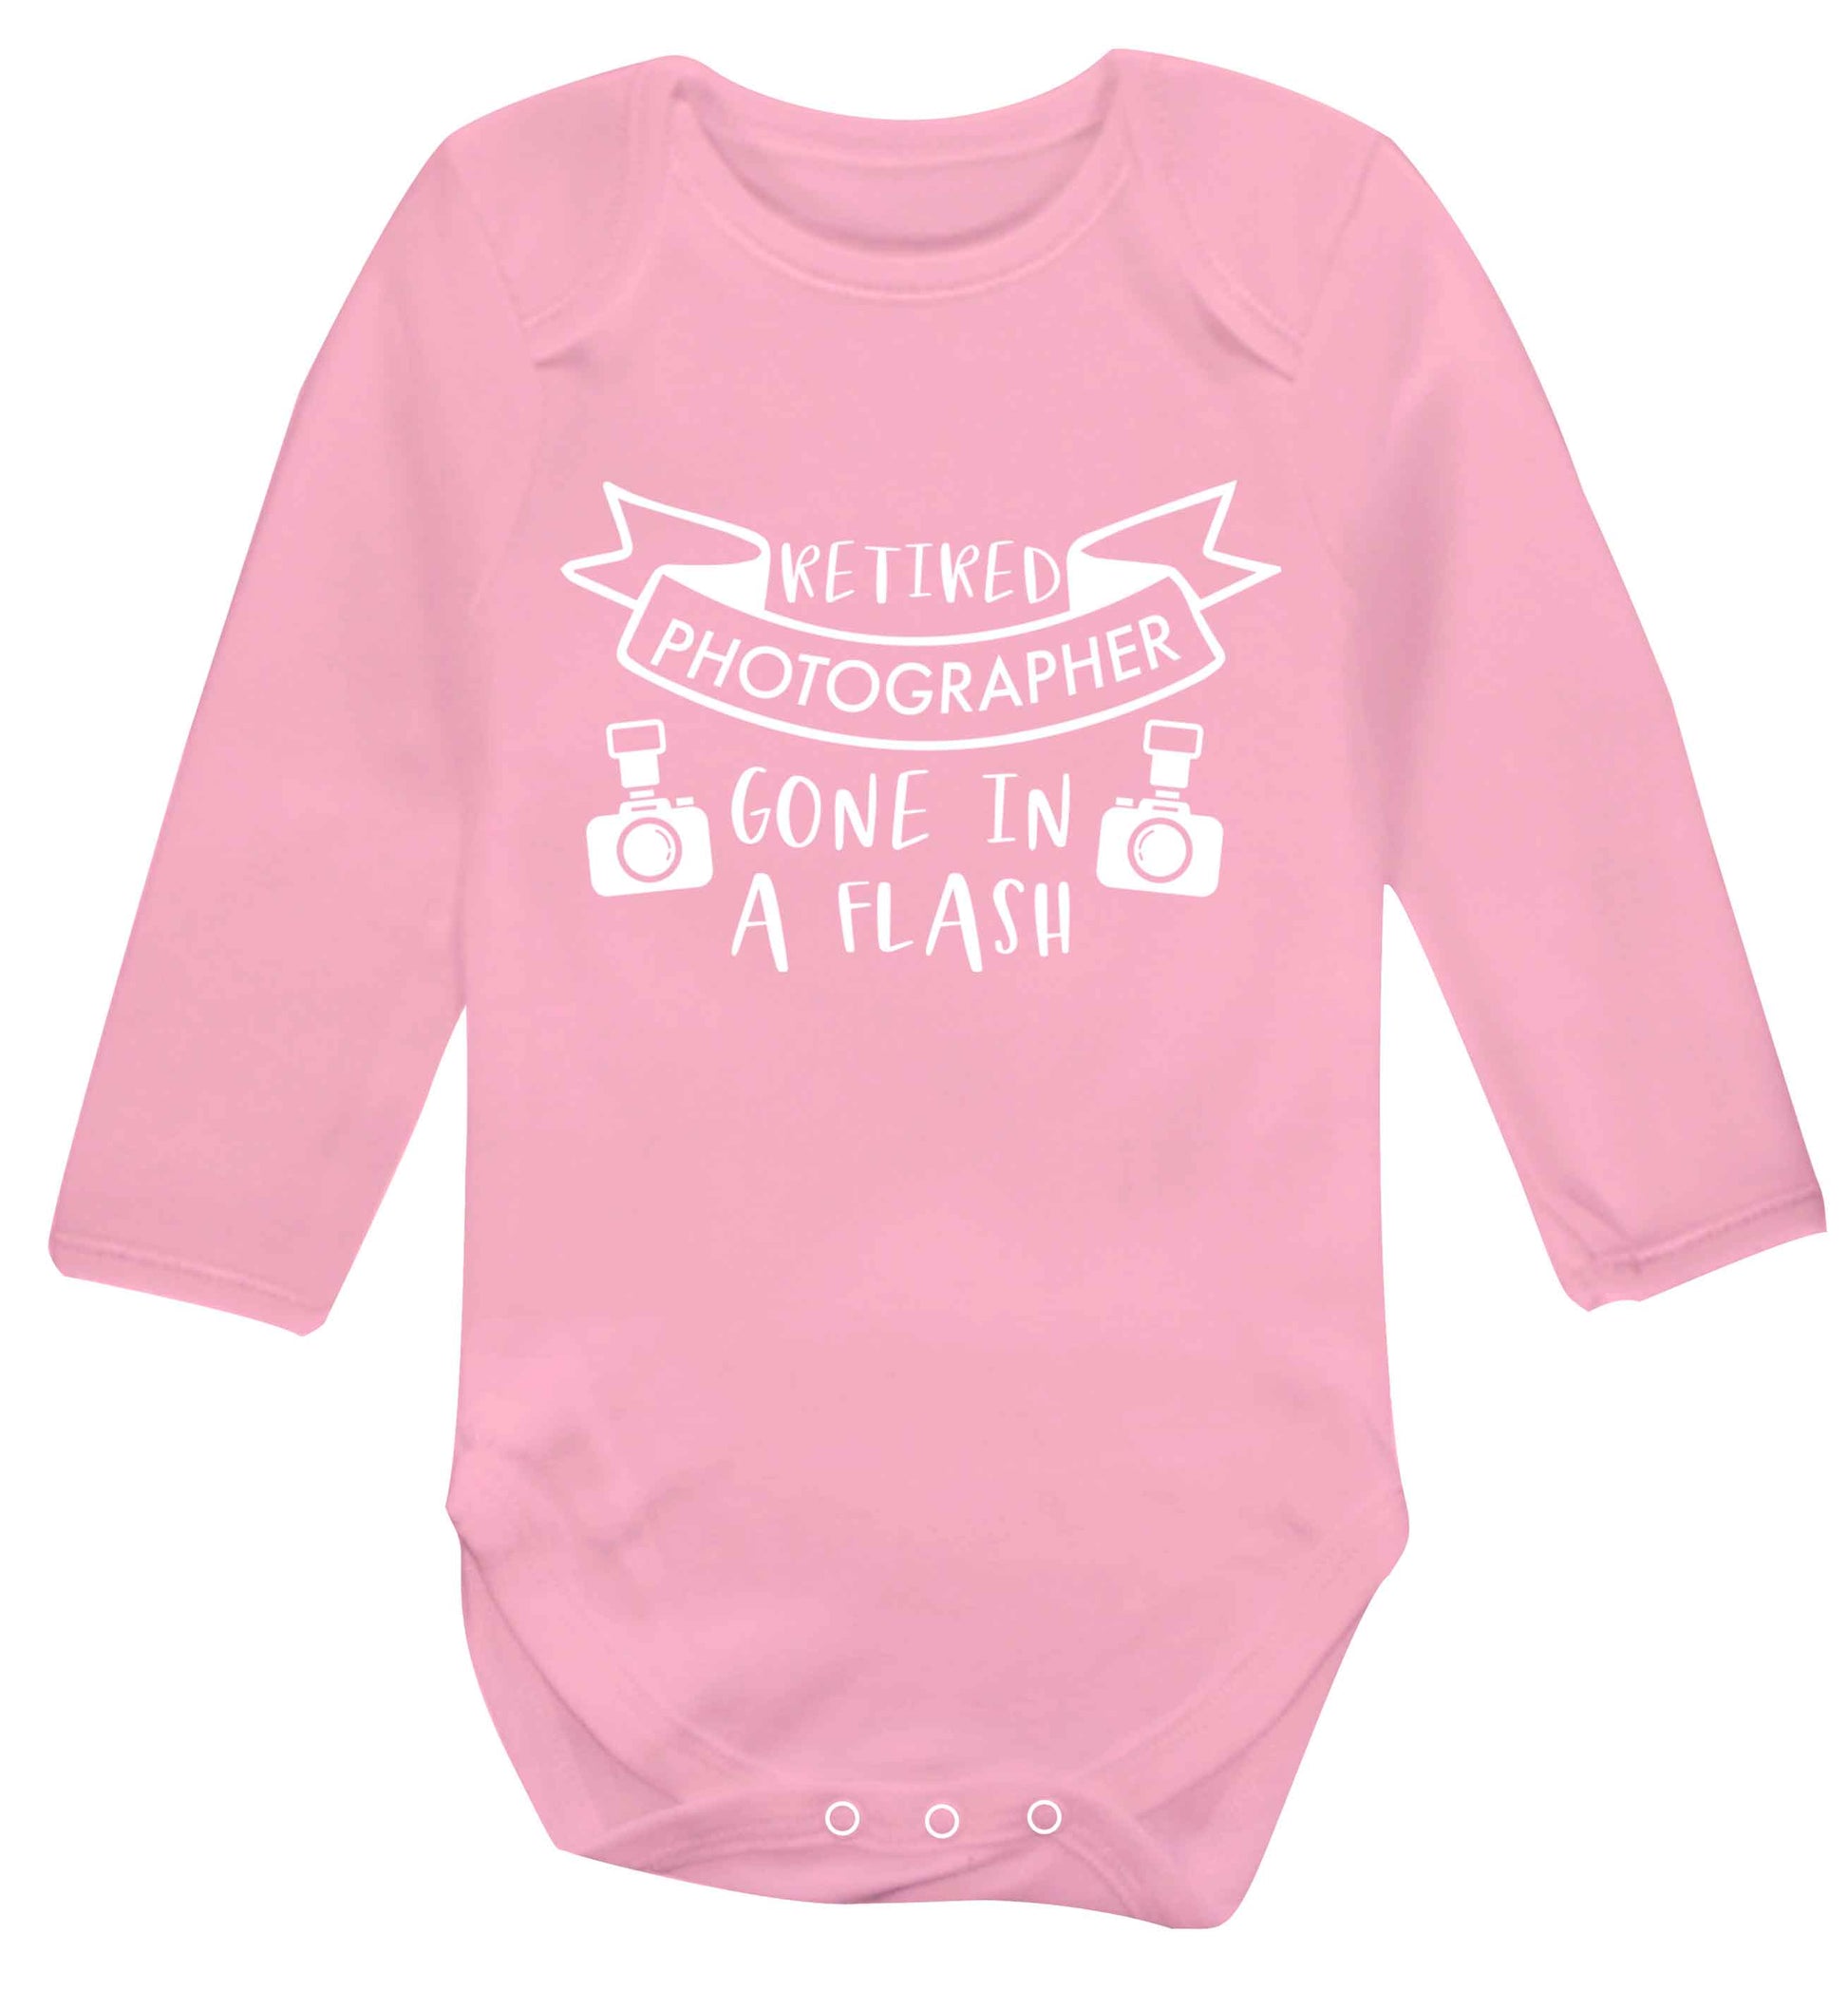 Retired photographer gone in a flash Baby Vest long sleeved pale pink 6-12 months